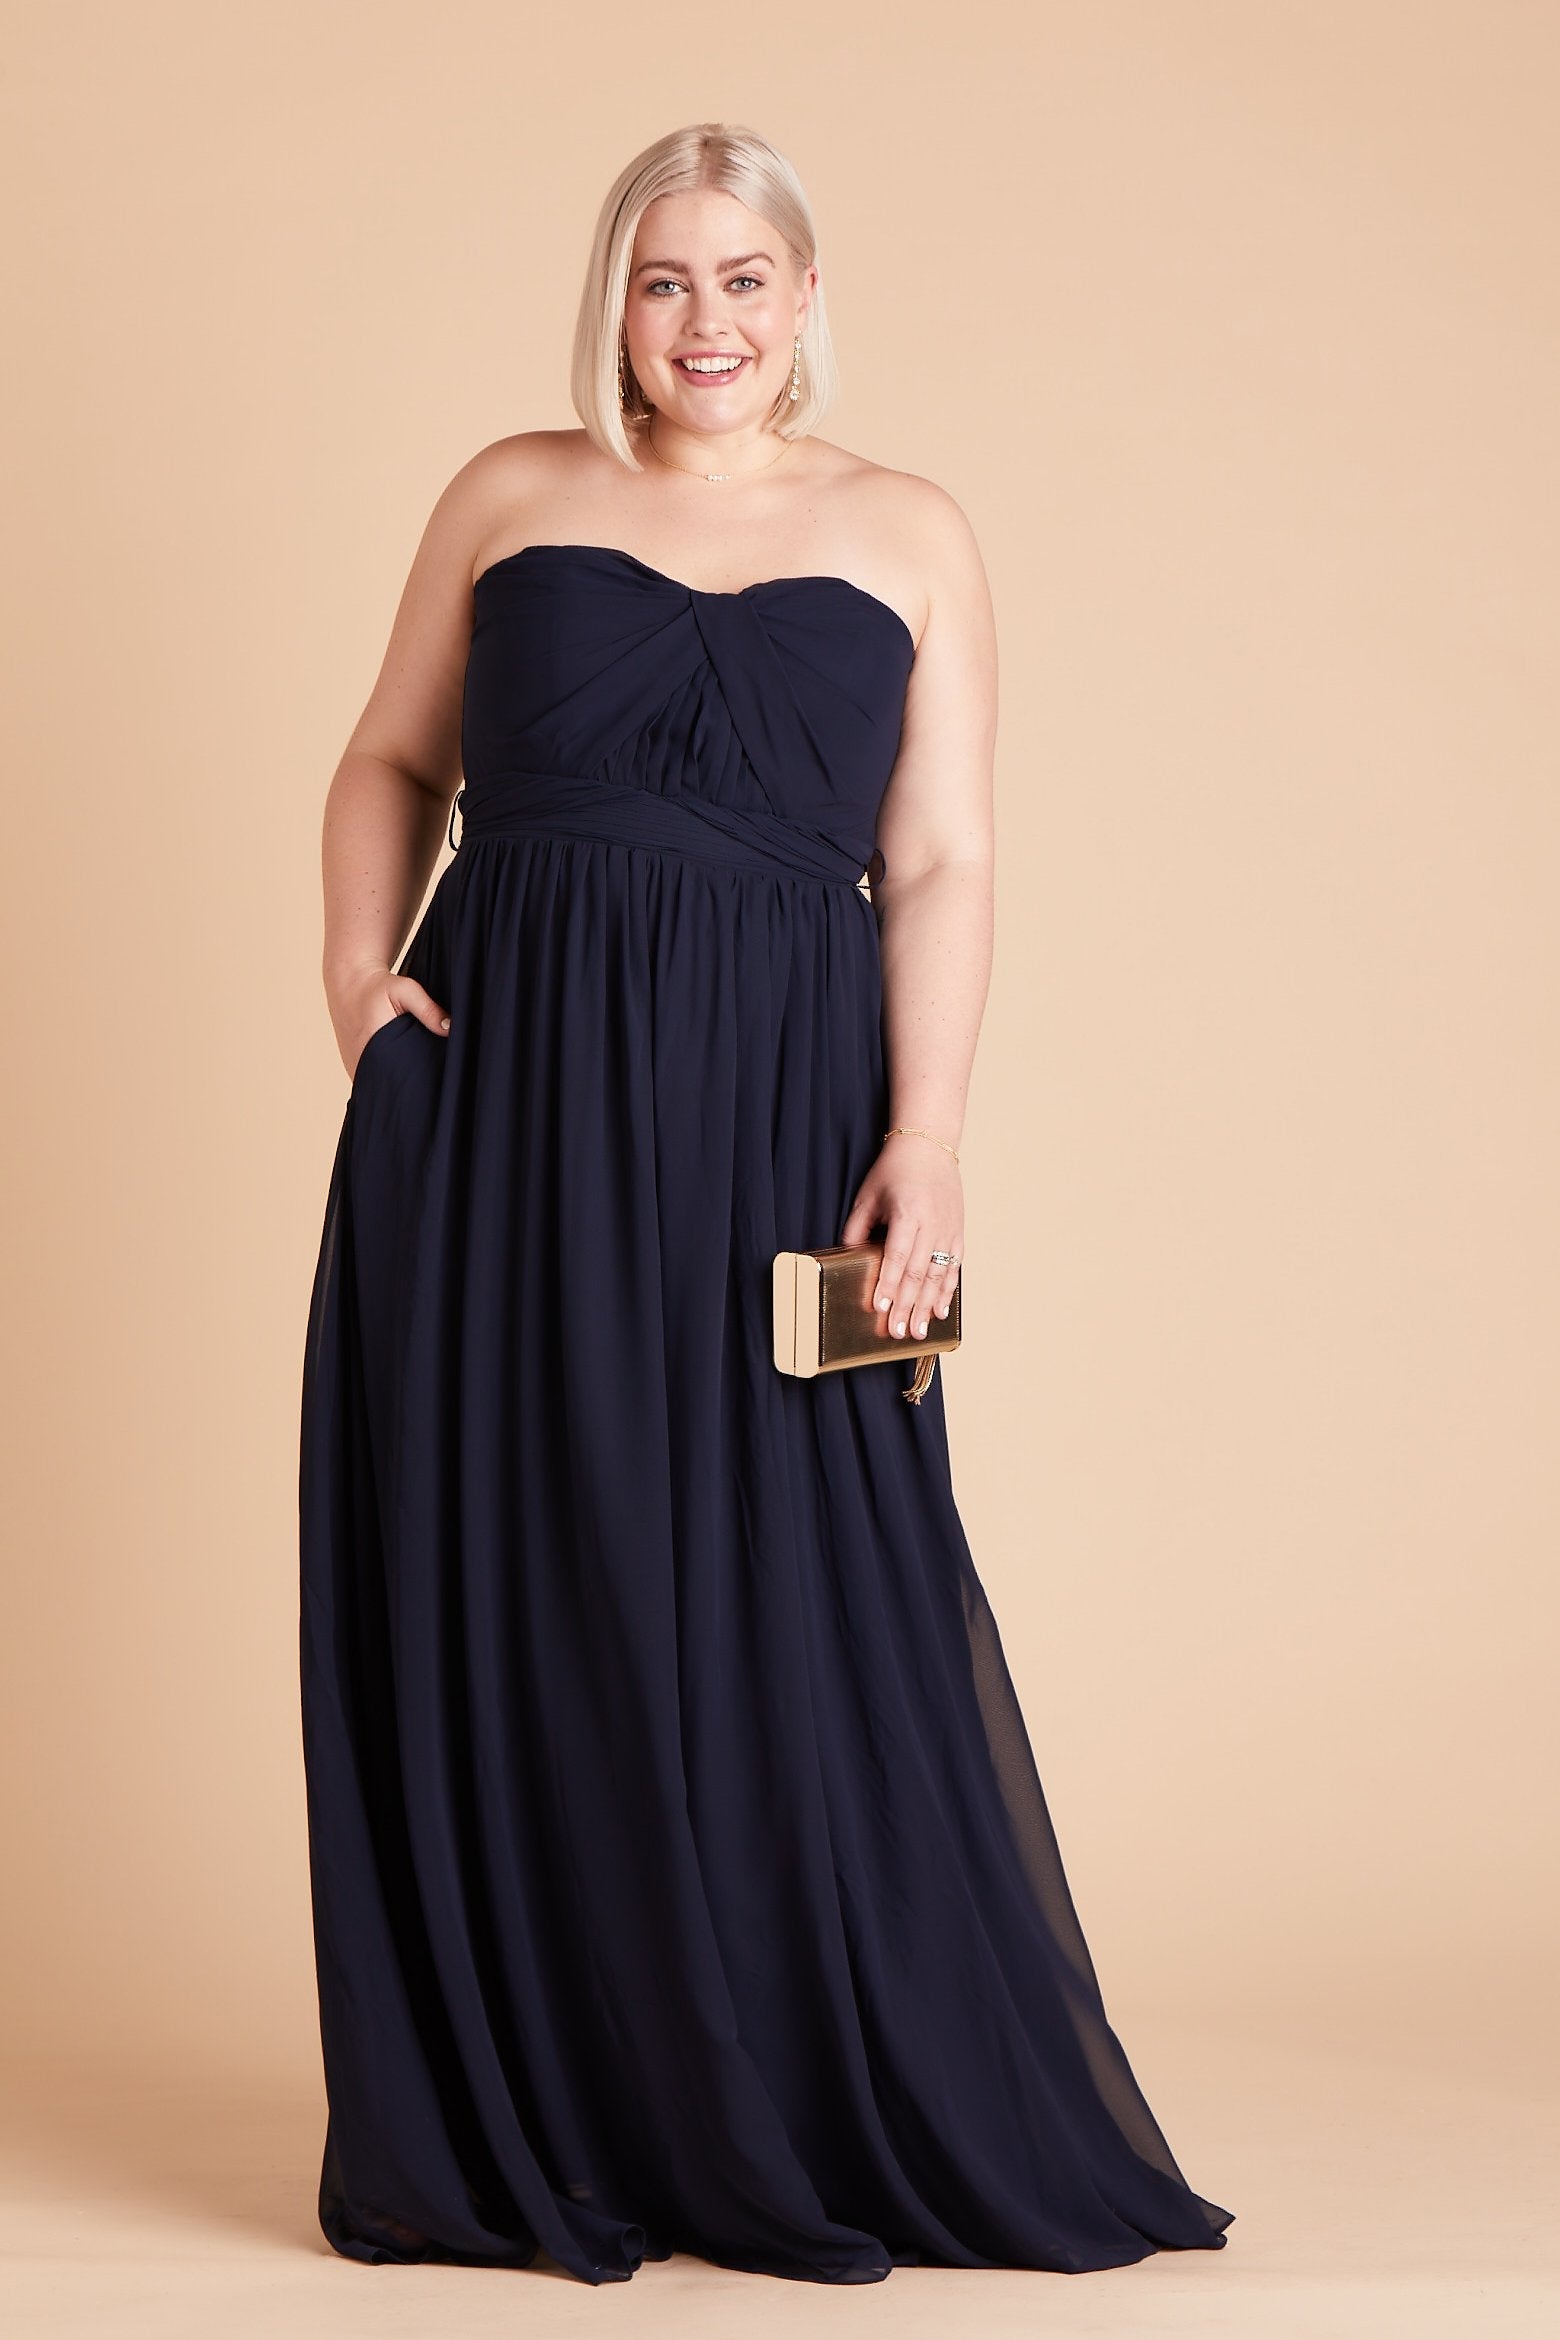 Grace convertible plus size bridesmaid dress in navy blue chiffon by Birdy Grey, front view with hand in pocket